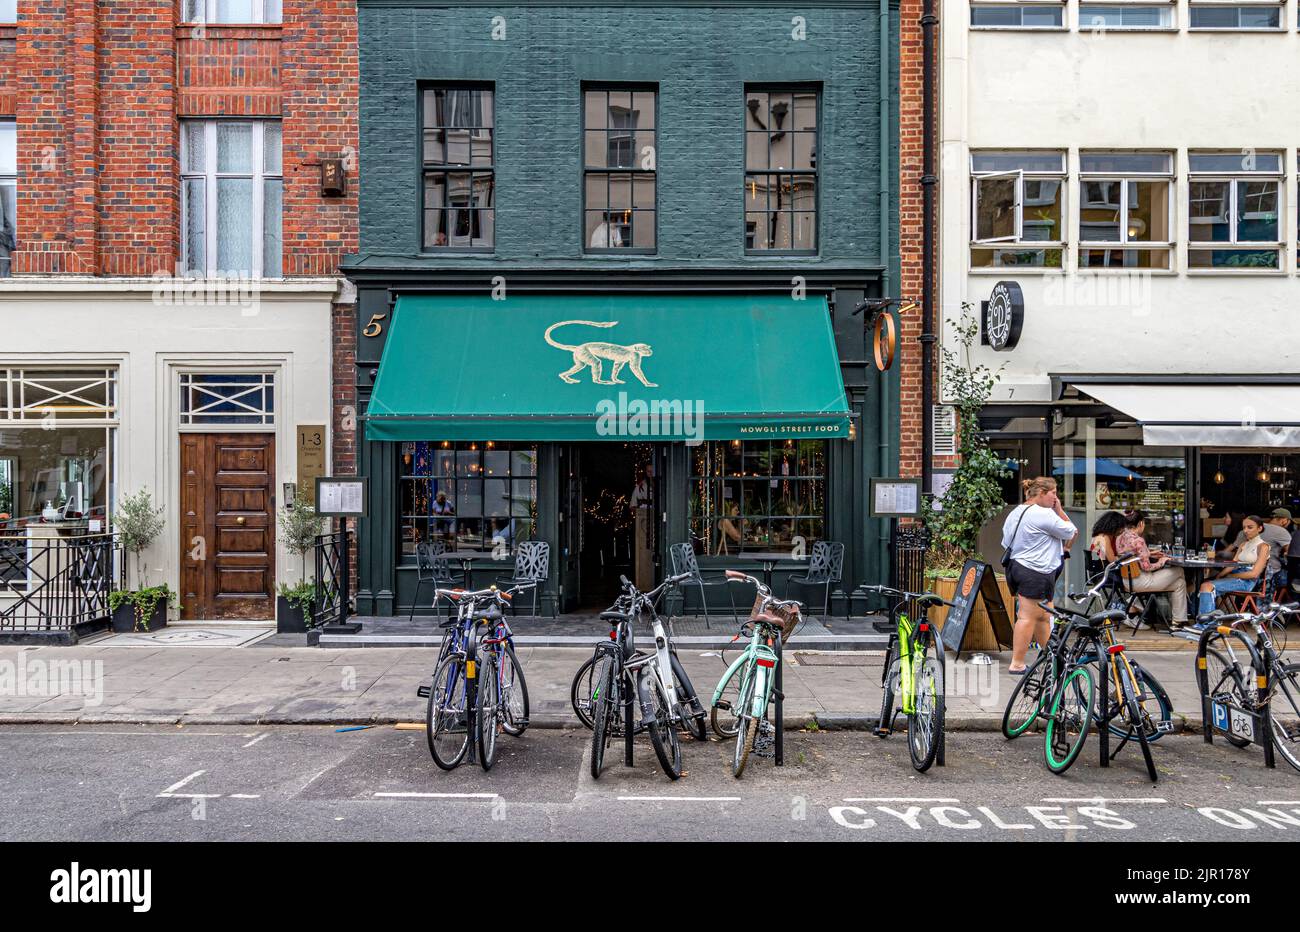 Mowgli Street Food restaurant on Charlotte Street in Fitzrovia, specialising in fresh Indian home cooking, London W1 Stock Photo